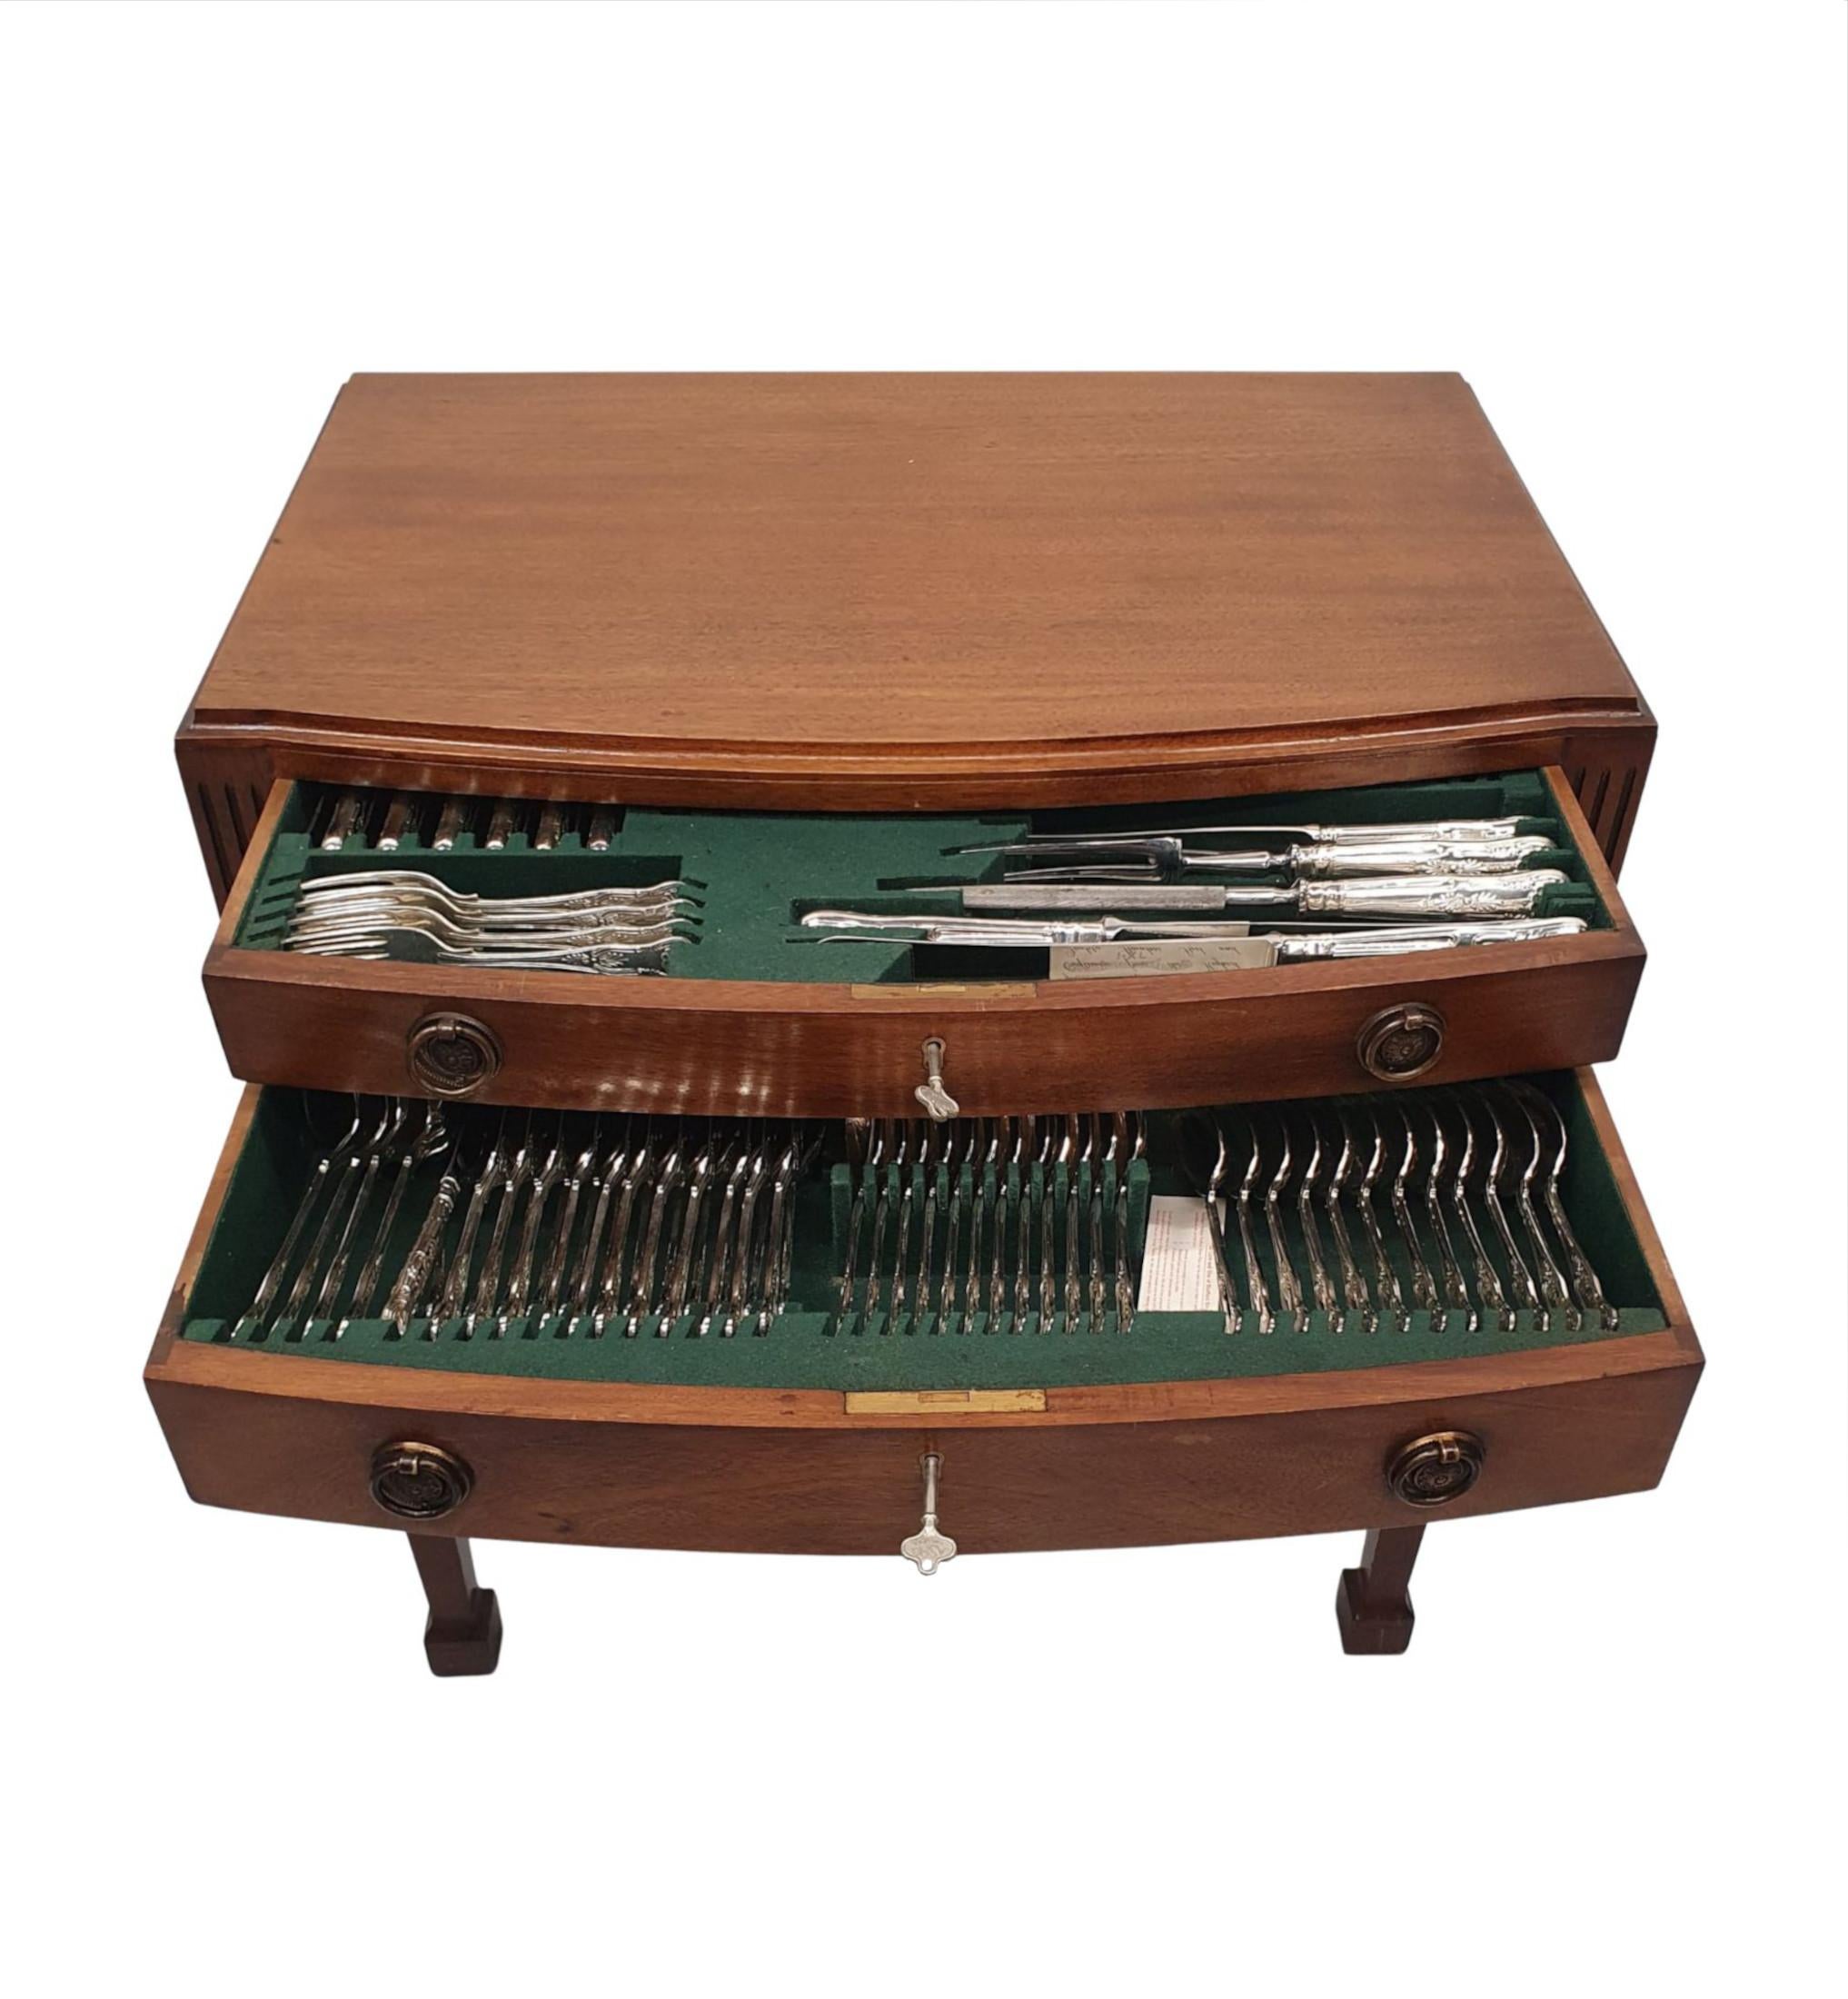 A fine 20th century mahogany fitted table canteen of Sheffield silver plate cutlery. The well figured moulded top of rectangular form with thumb moulded edge is raised over two single graduated, cockbeaded drawers with decorative brass ring pulls